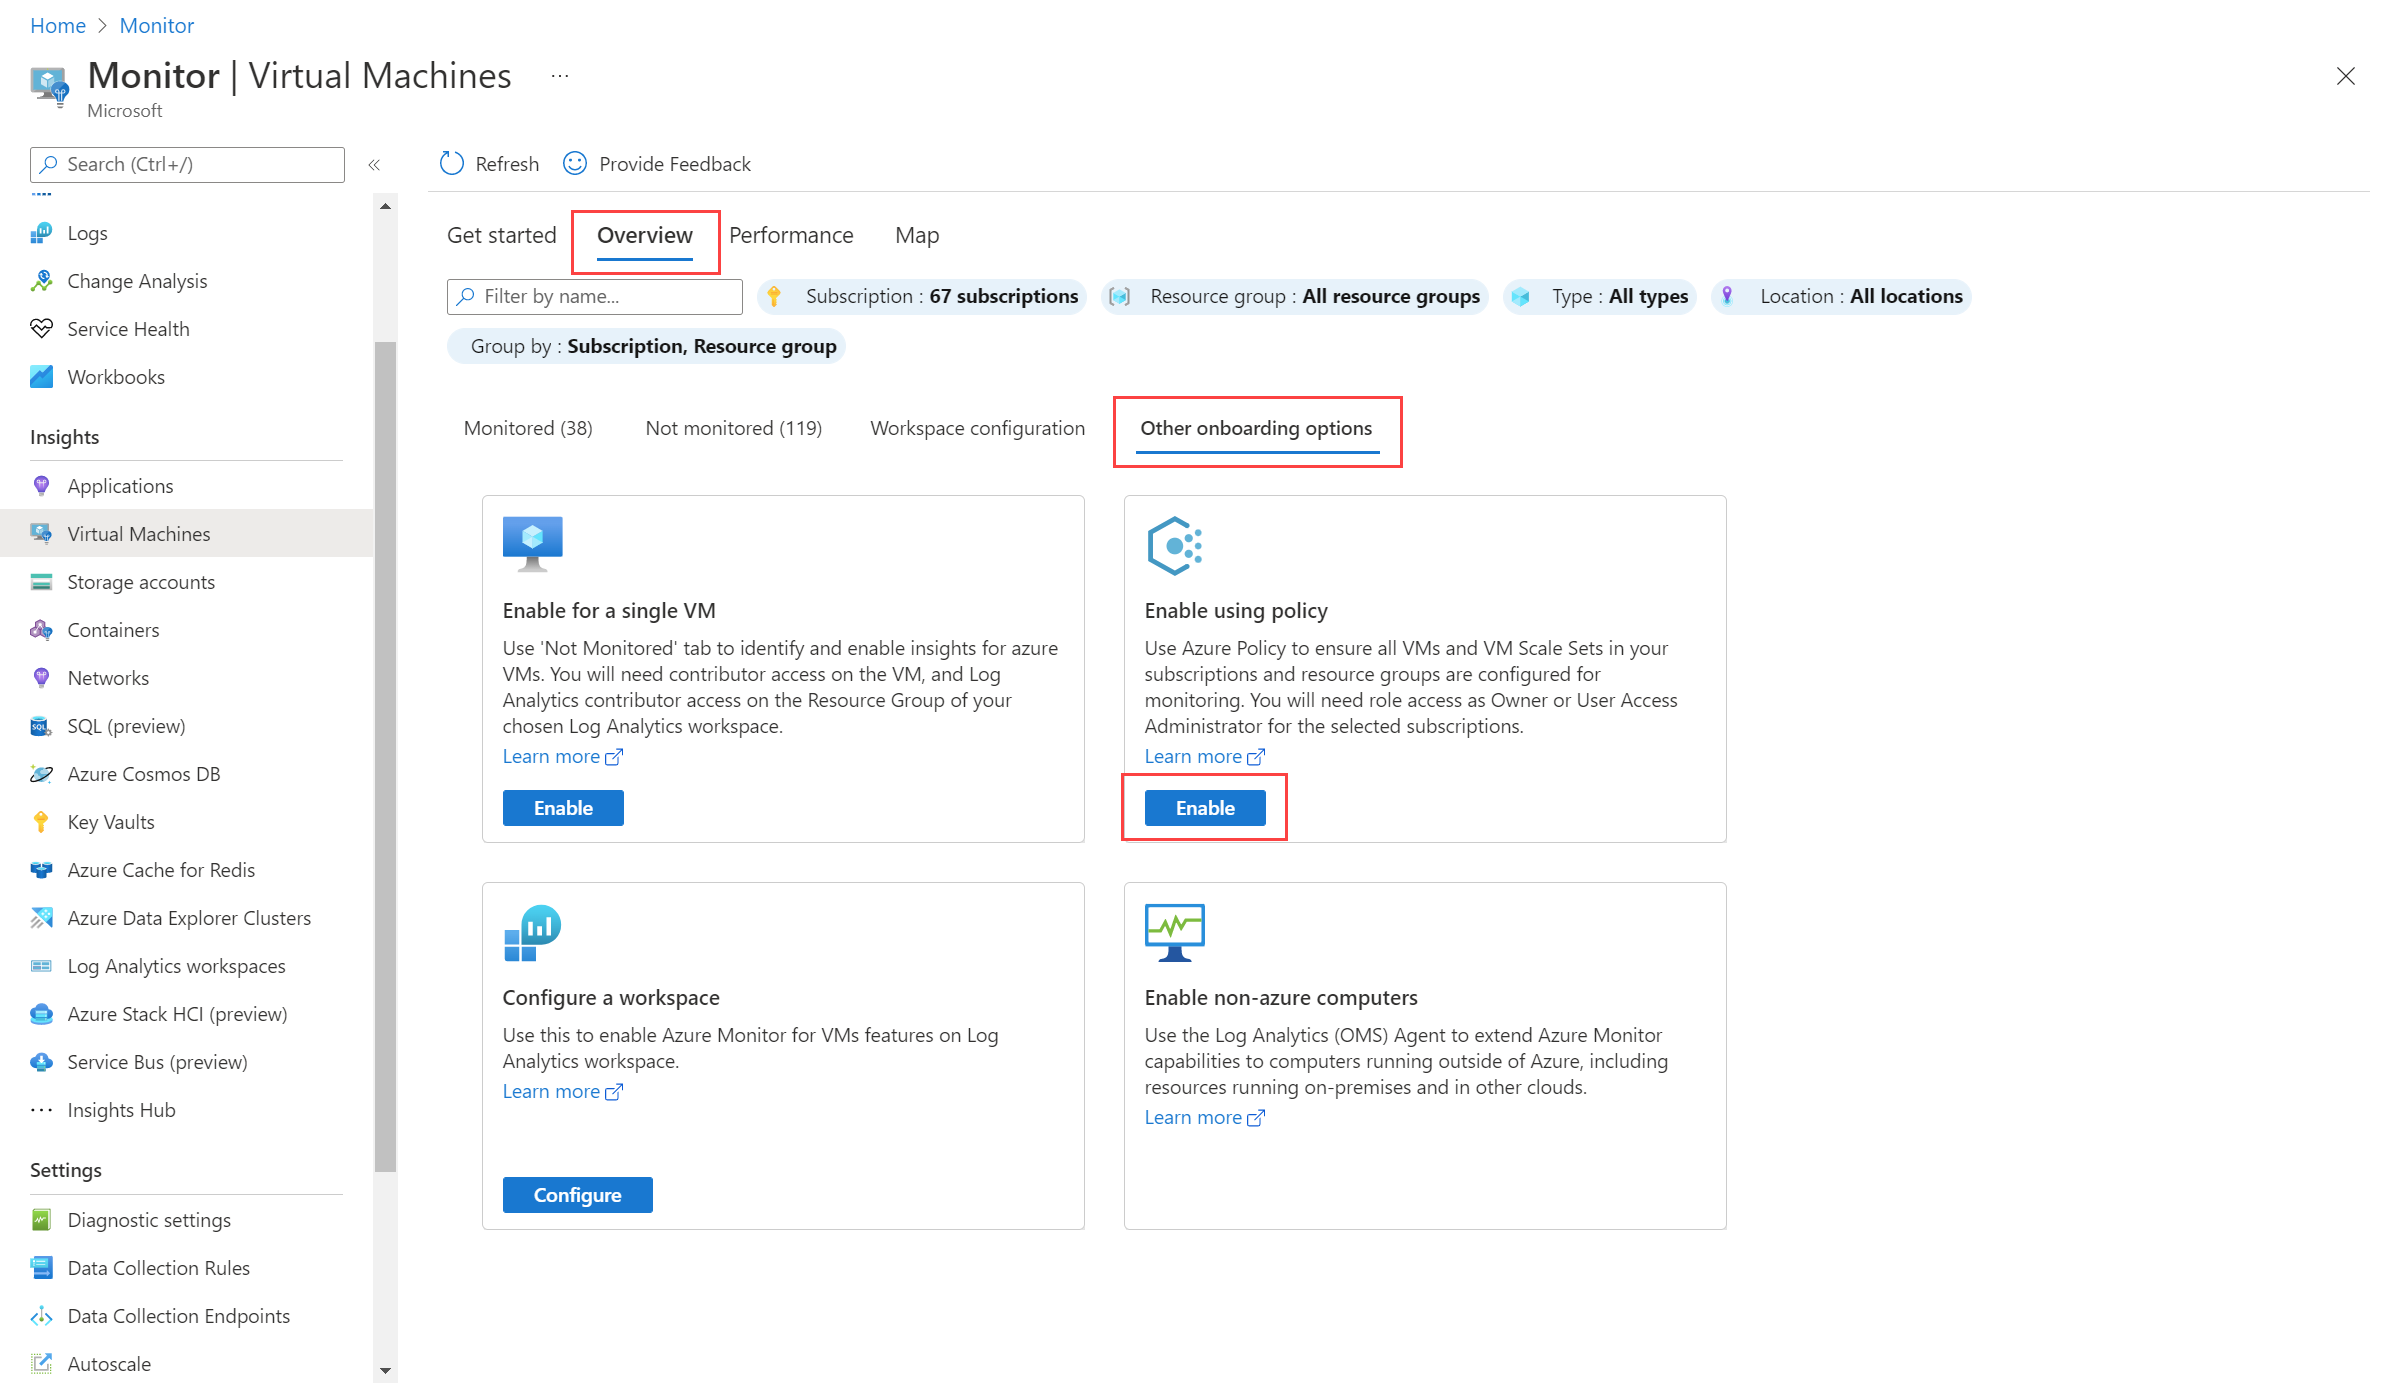 Screenshot showing other onboarding options page of VM insights with the Enable using policy option.